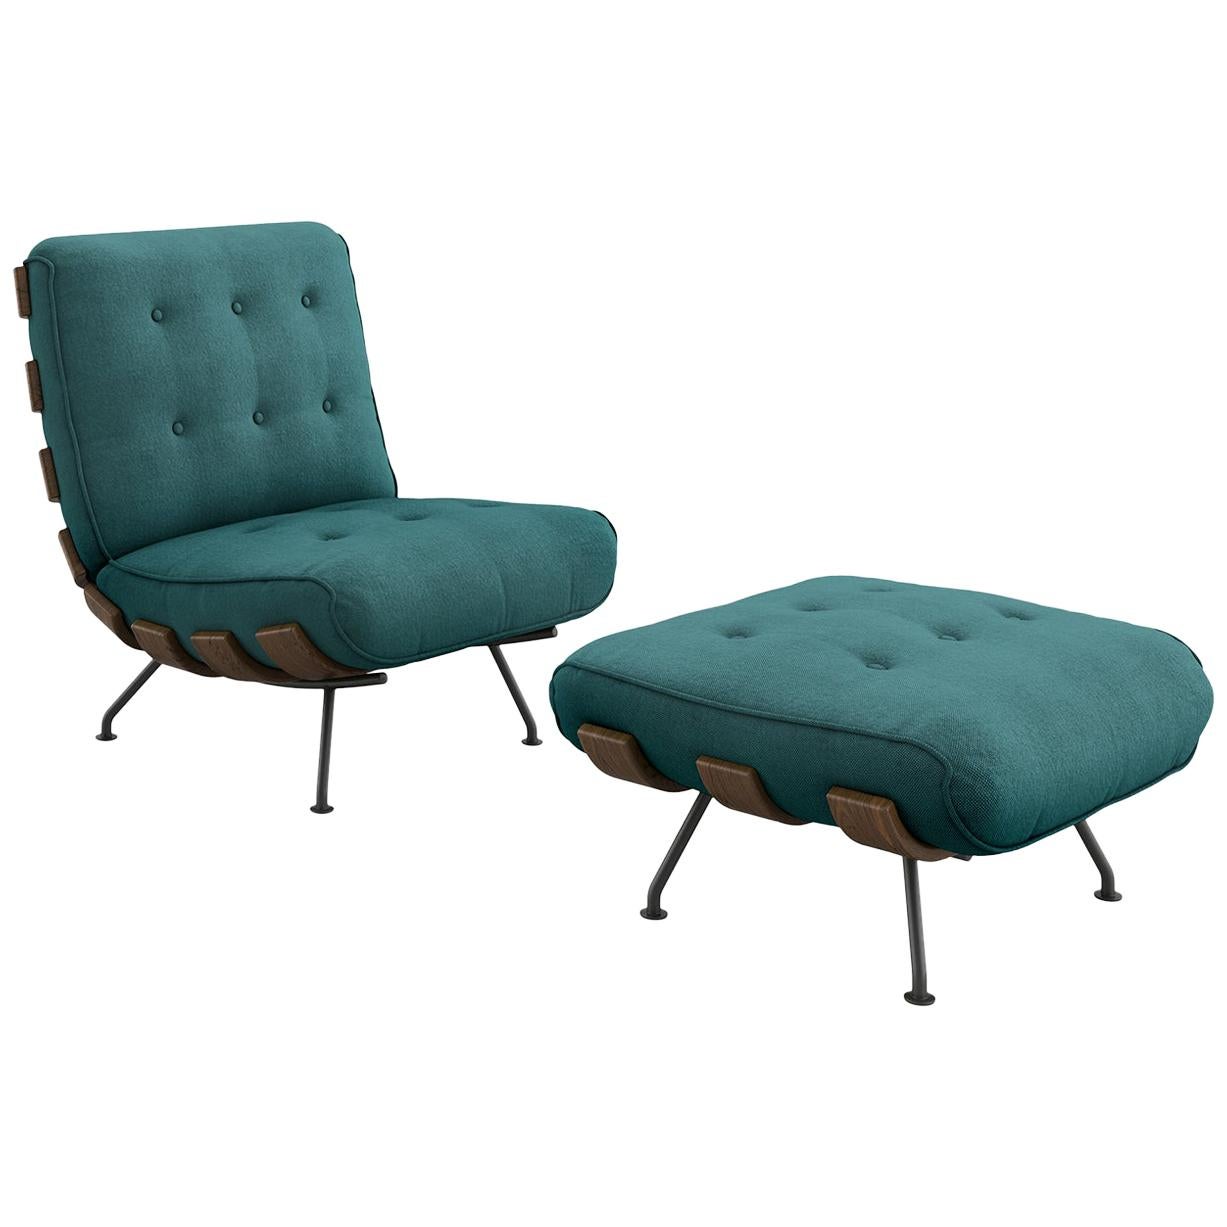 Tacchini Costela Chair with Ottoman in Green Bryony Fabric by Martin Eisler